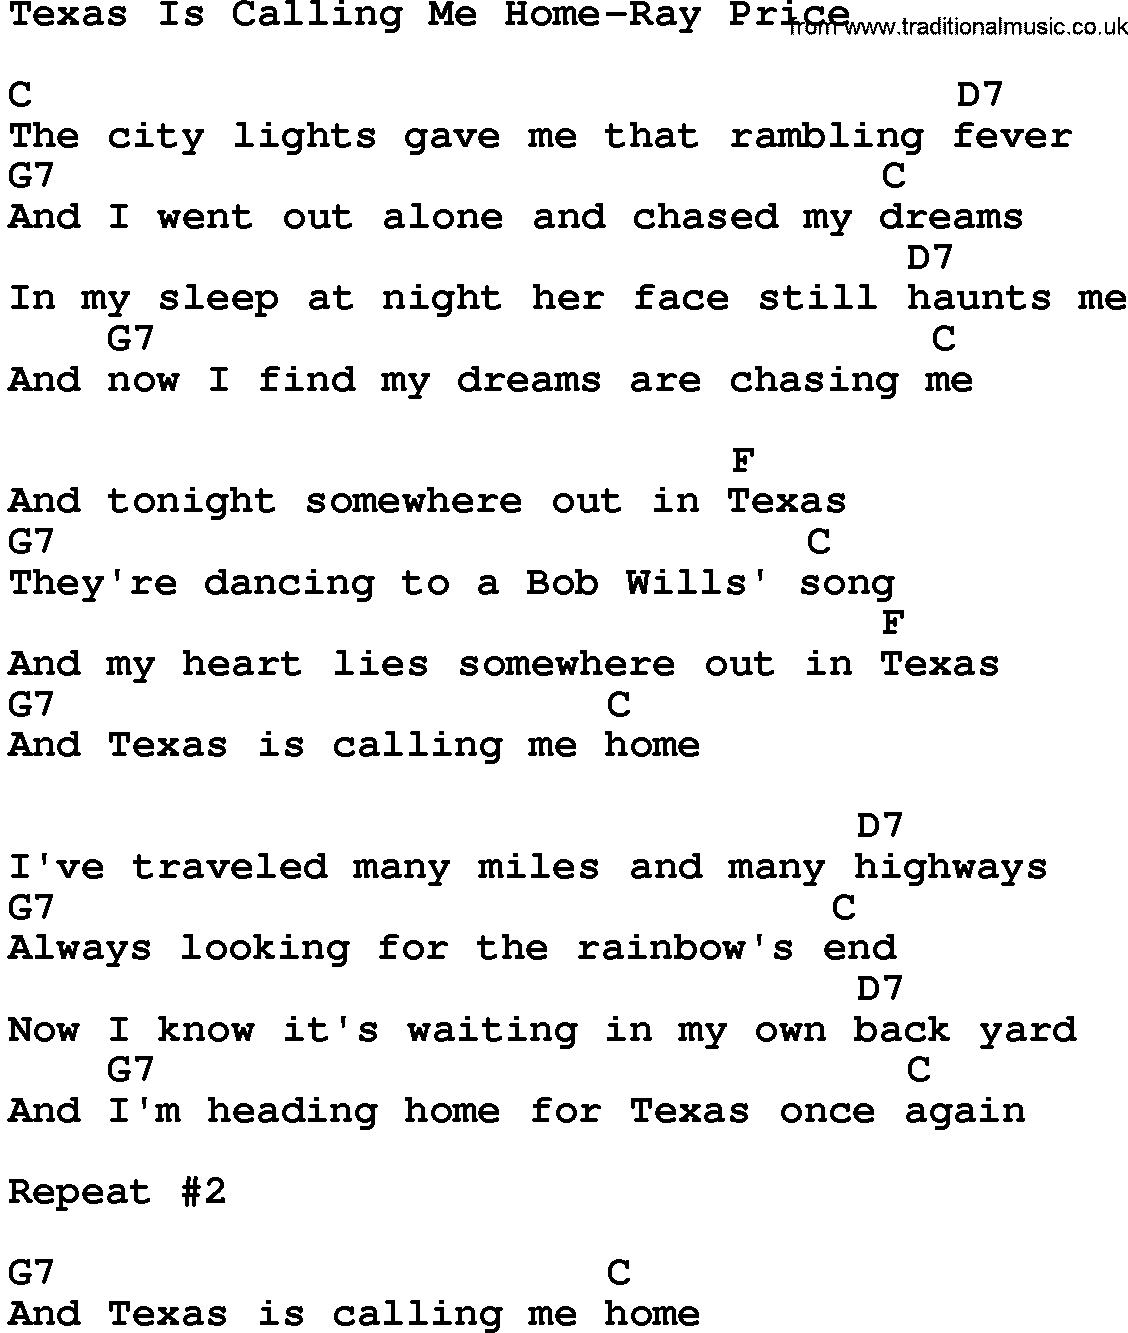 Country music song: Texas Is Calling Me Home-Ray Price lyrics and chords